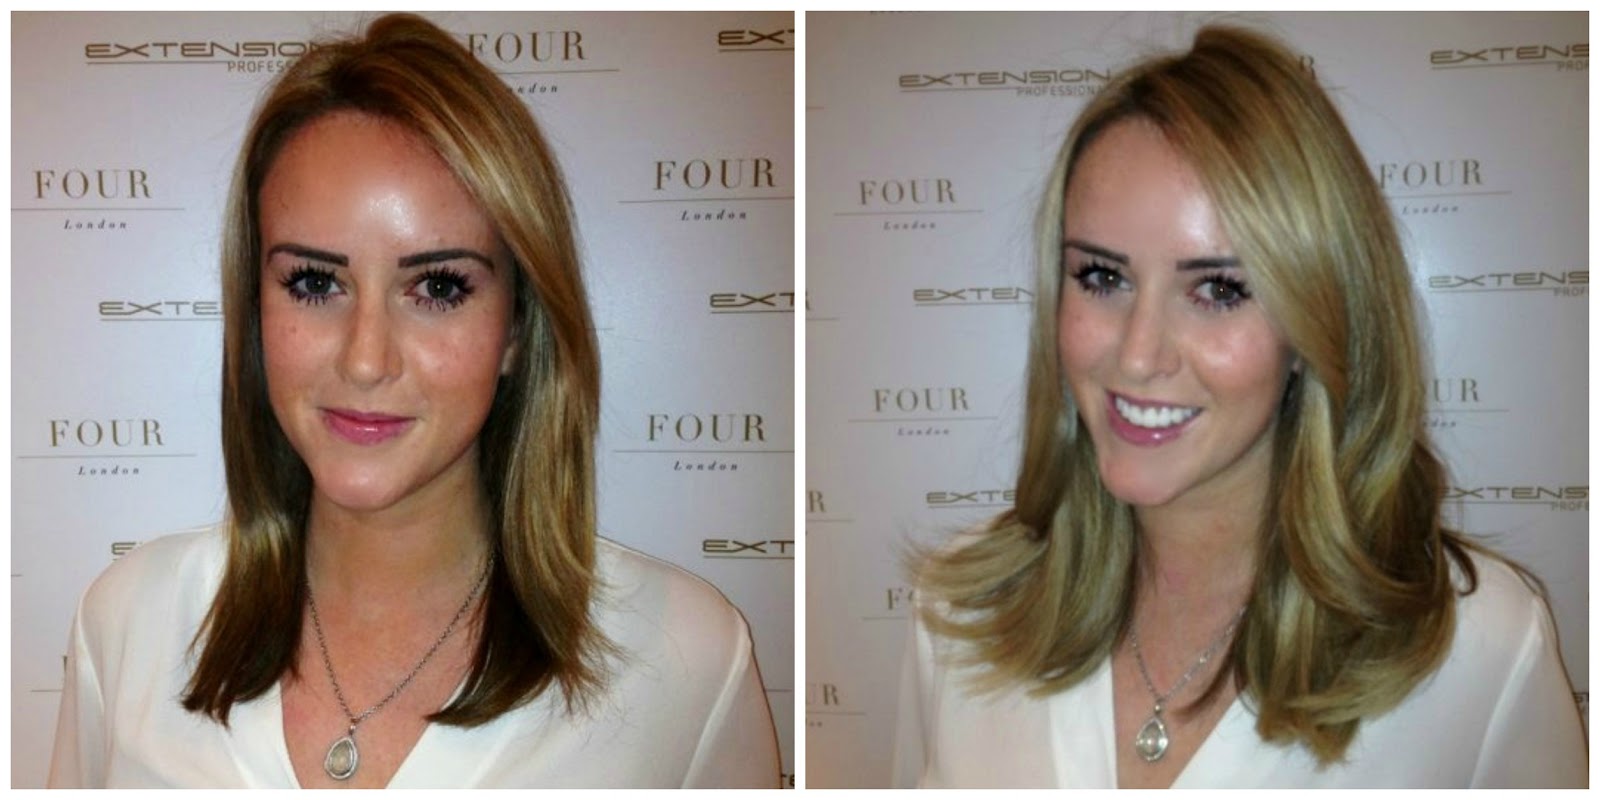 Pro Volume Extension Professional Hair Extensions by Louise Bailey at FOUR  London | Before and After Photos and Review | Jennifer Rosellen